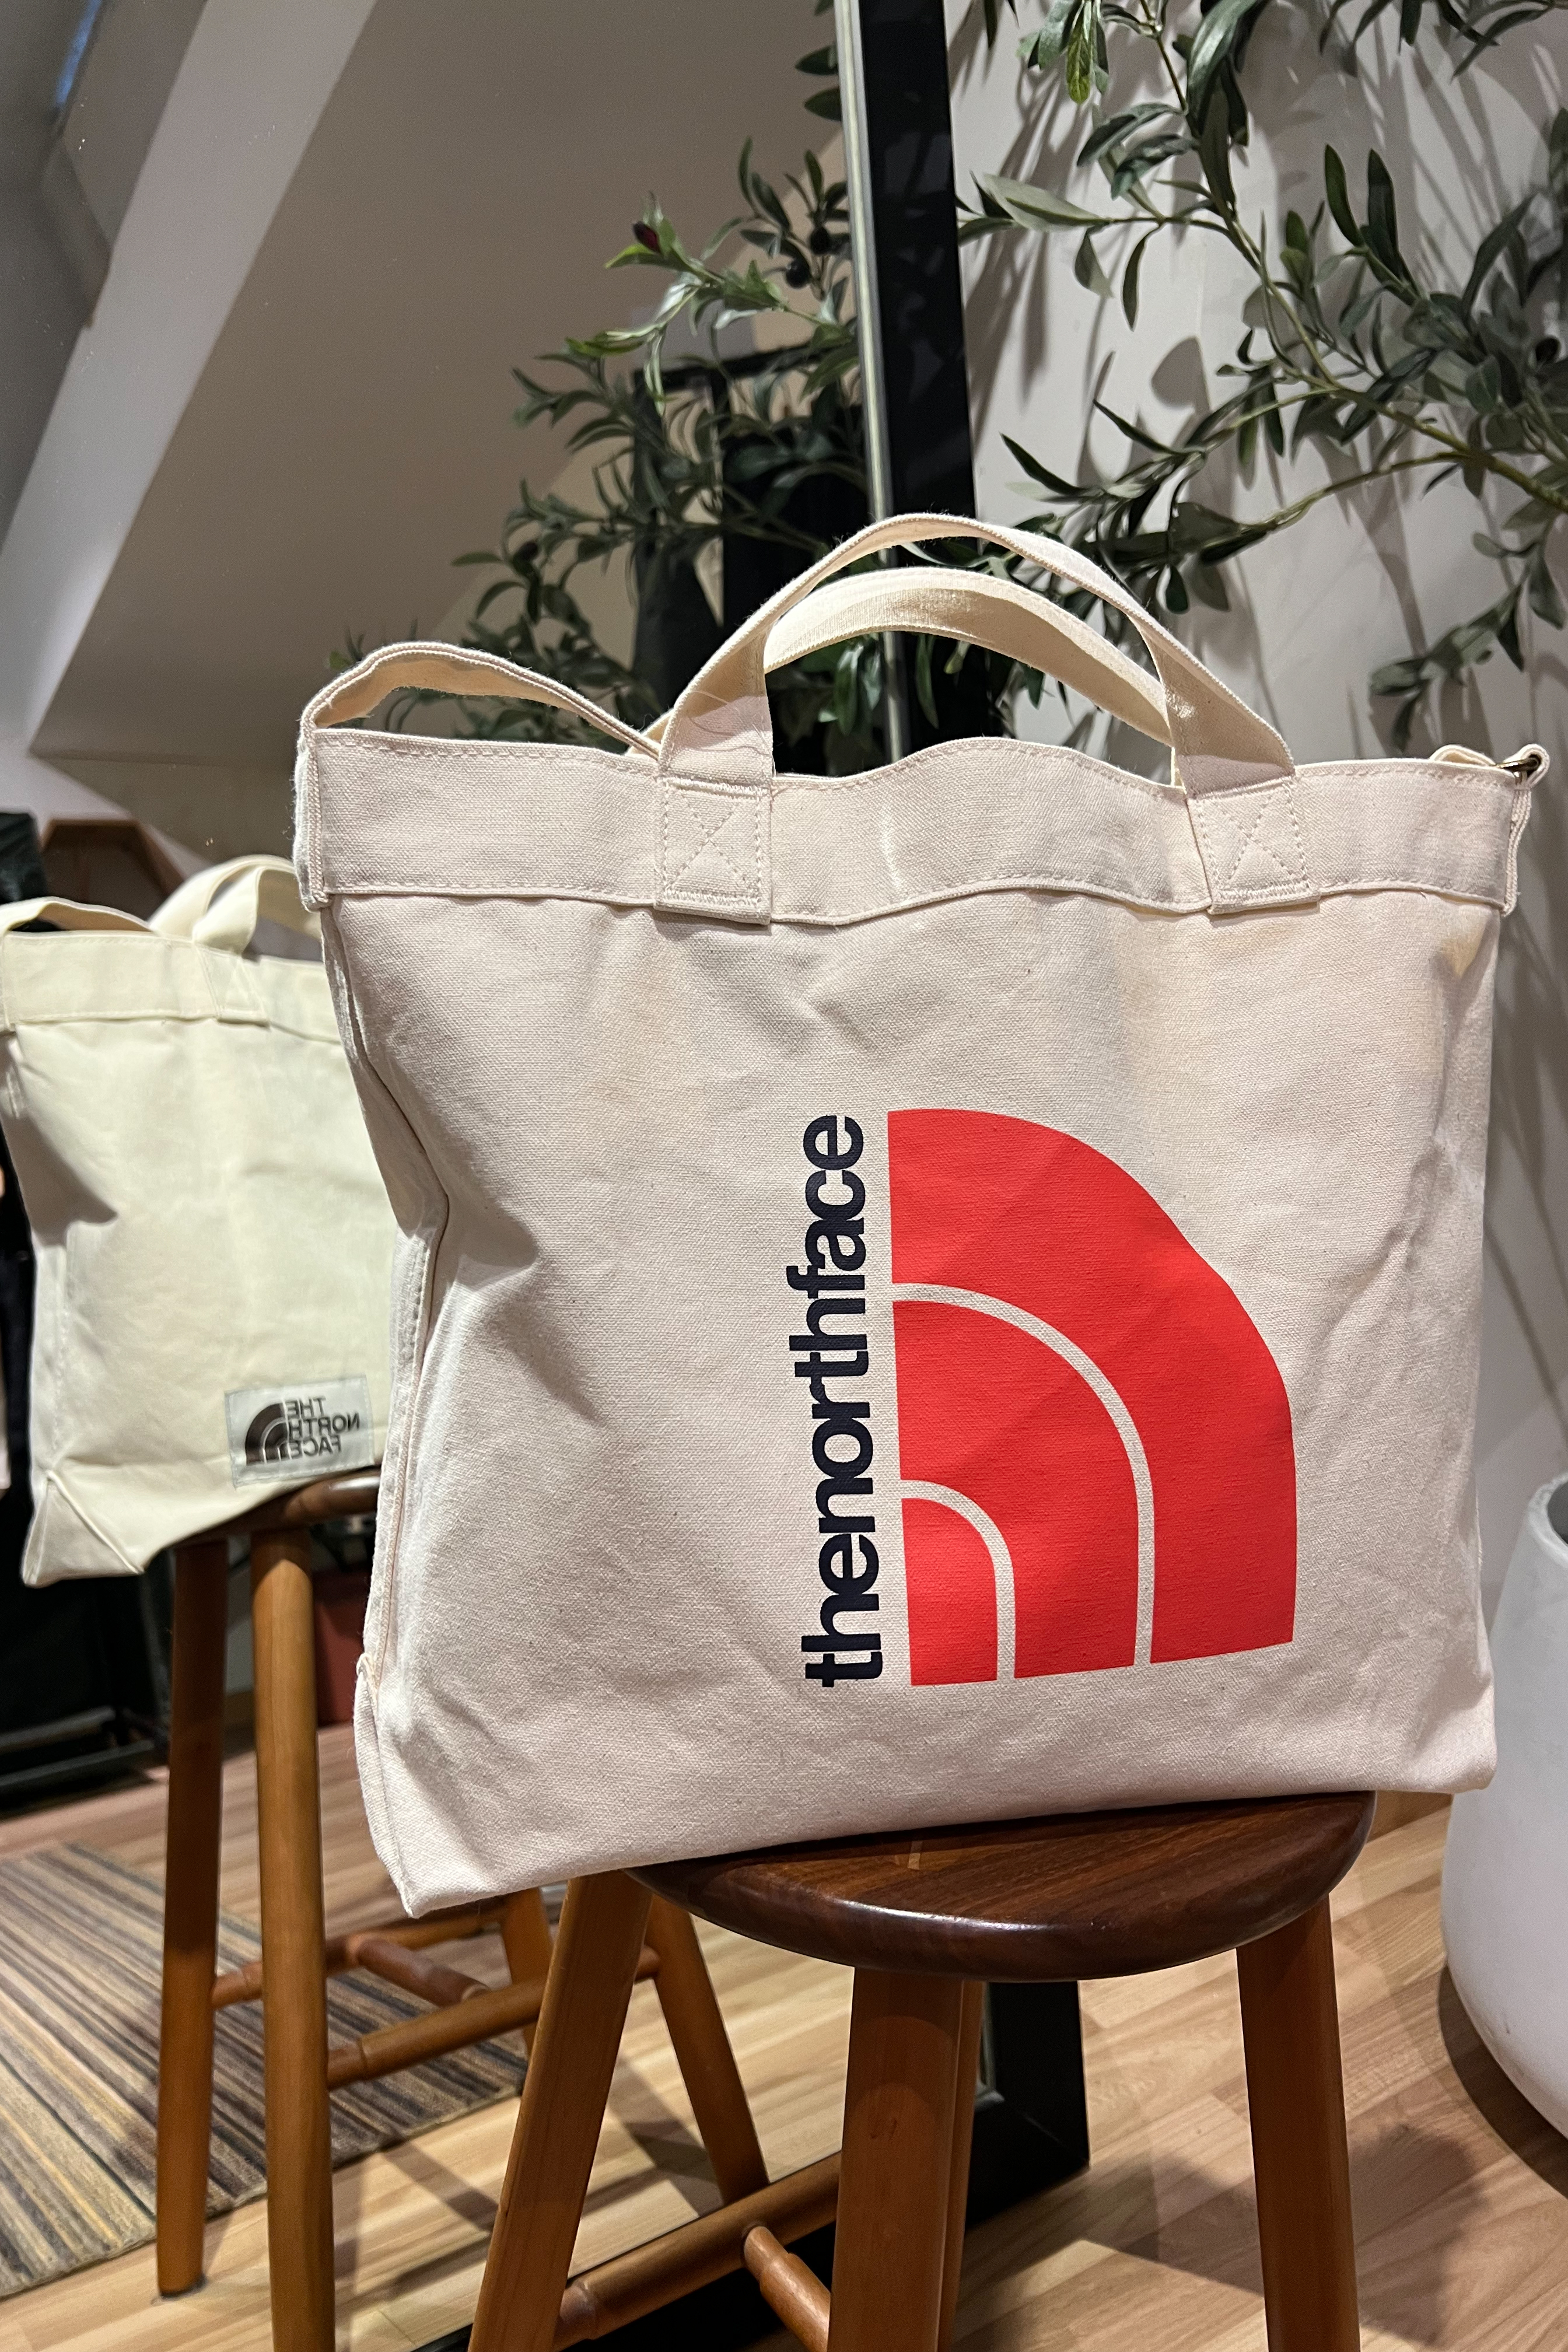 The North Face Adjustable 17L cotton tote in off white